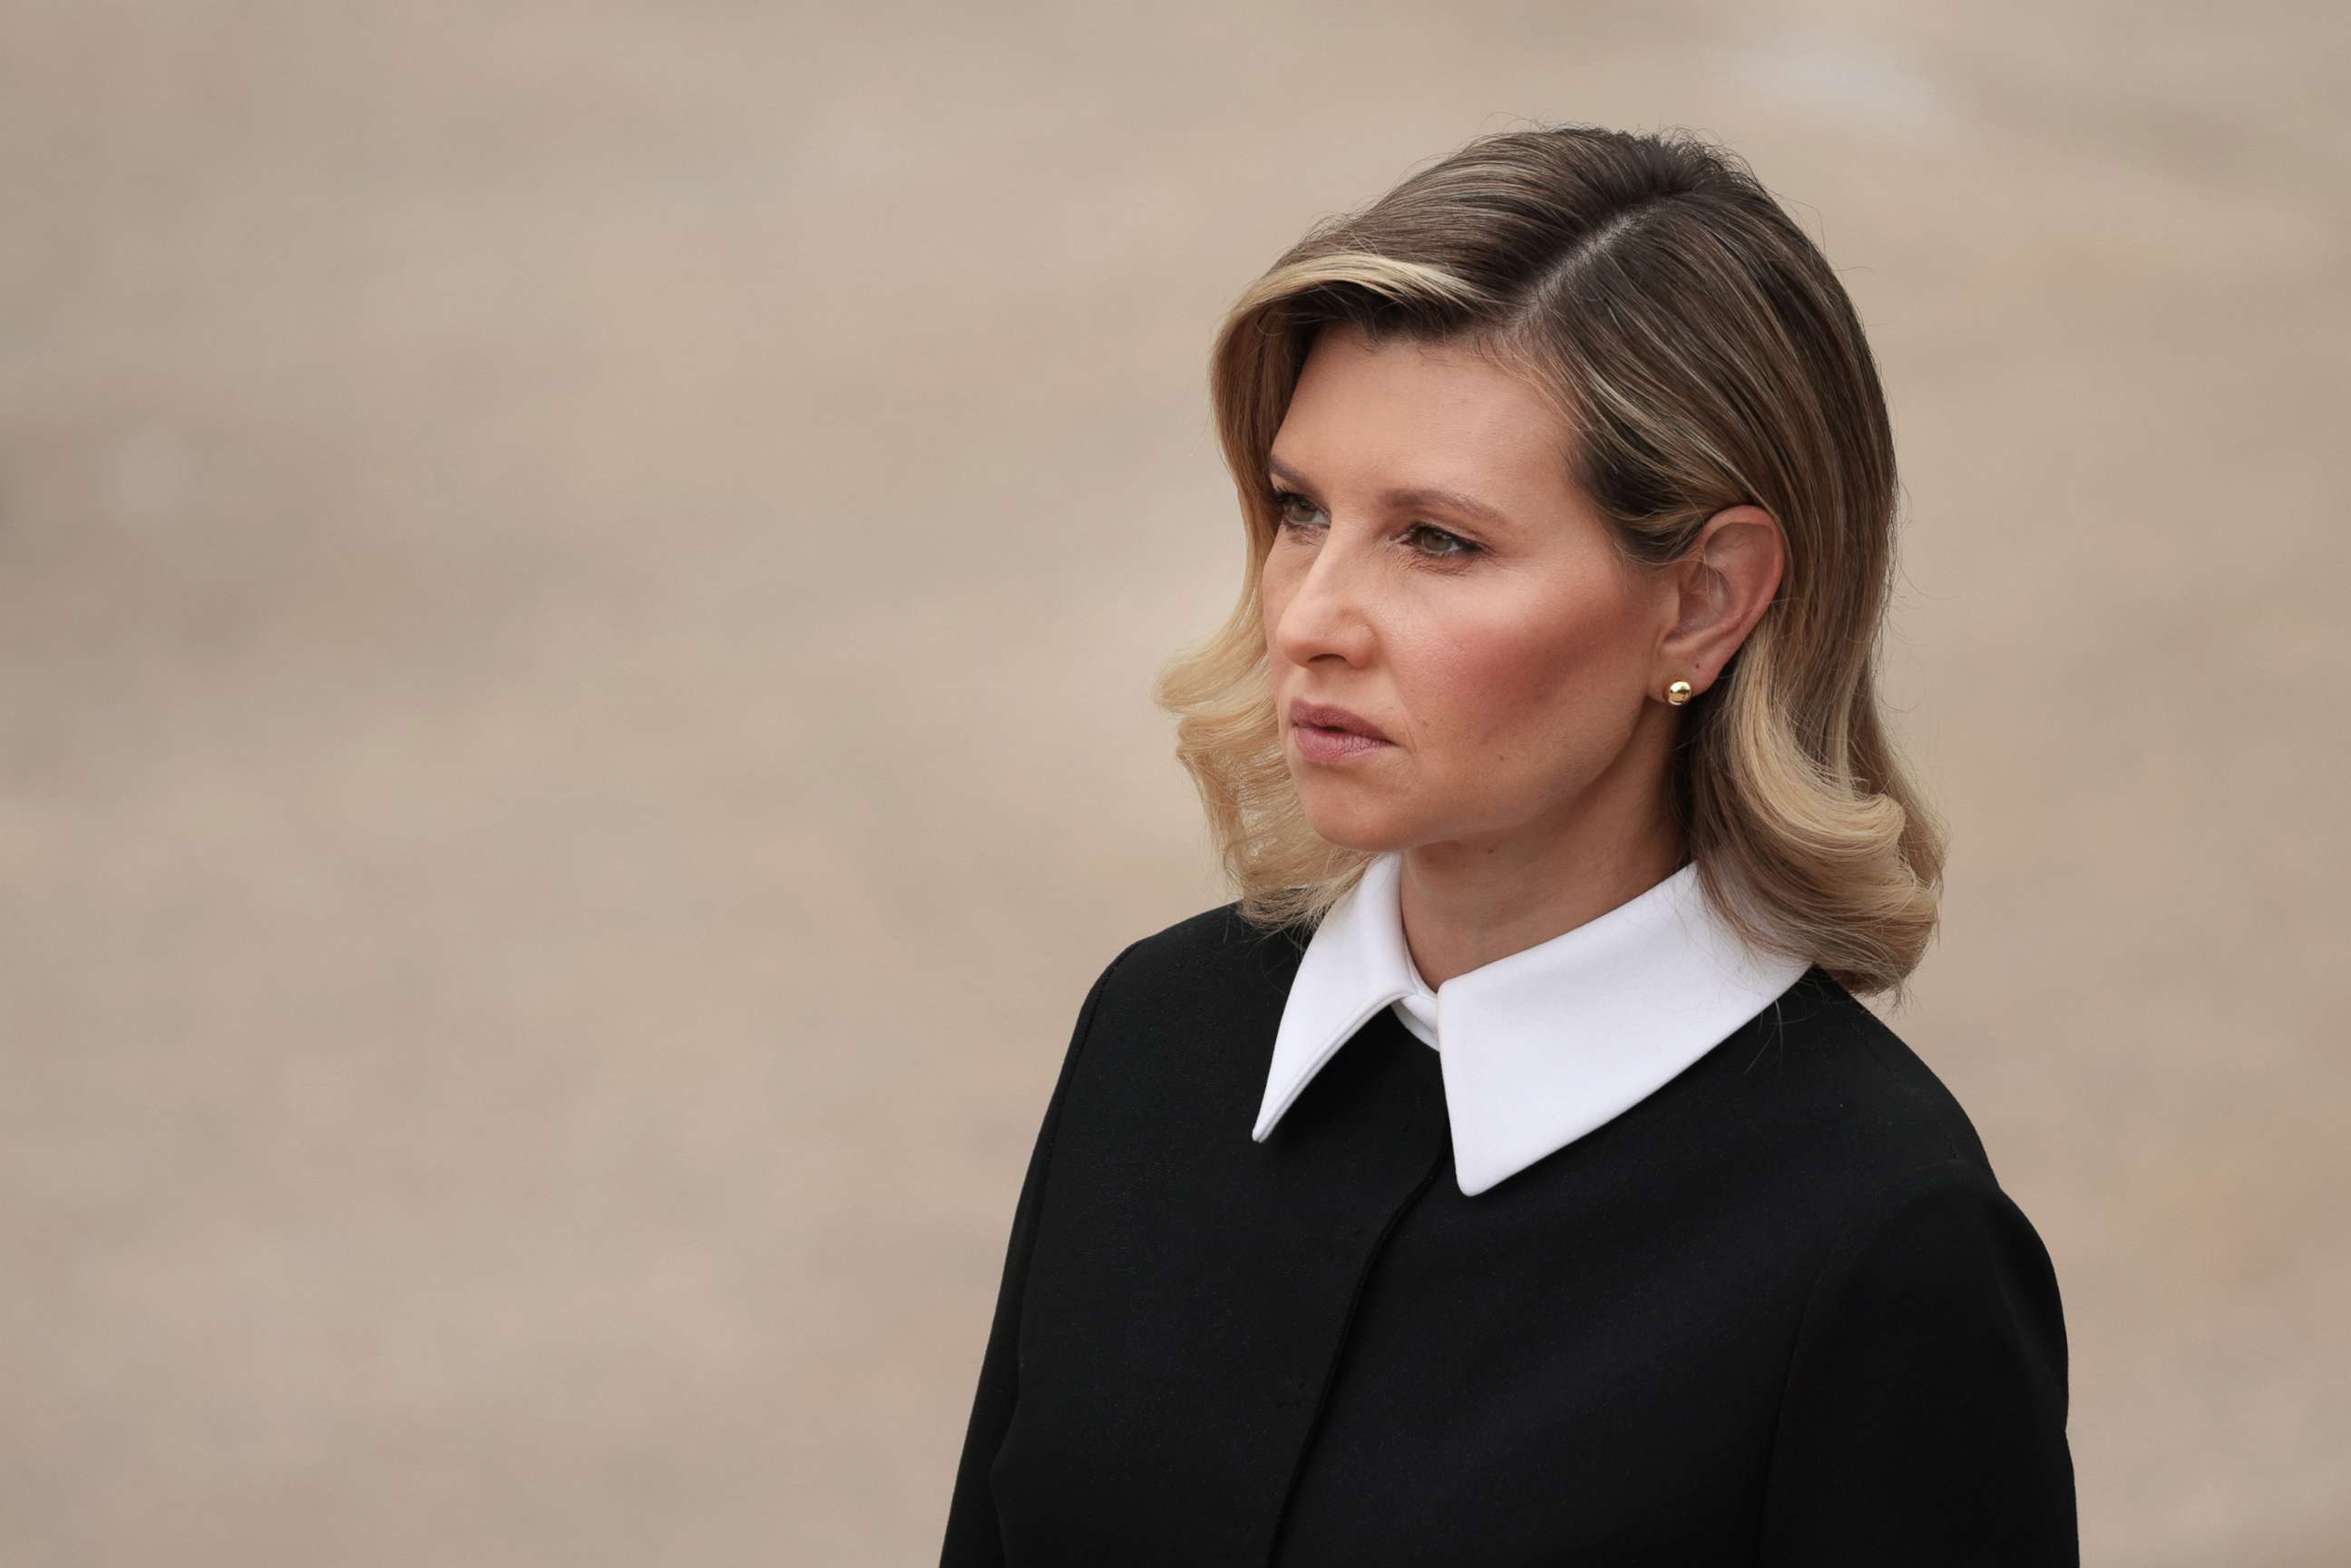 PHOTO: In this Sept. 1, 2021, file photo, Olena Zelenska looks on as her husband, Ukrainian President Volodymyr Zelensky participates in a ceremony at the Tomb of the Unknown Soldier at Arlington National Cemetery, in Arlington, Virginia.